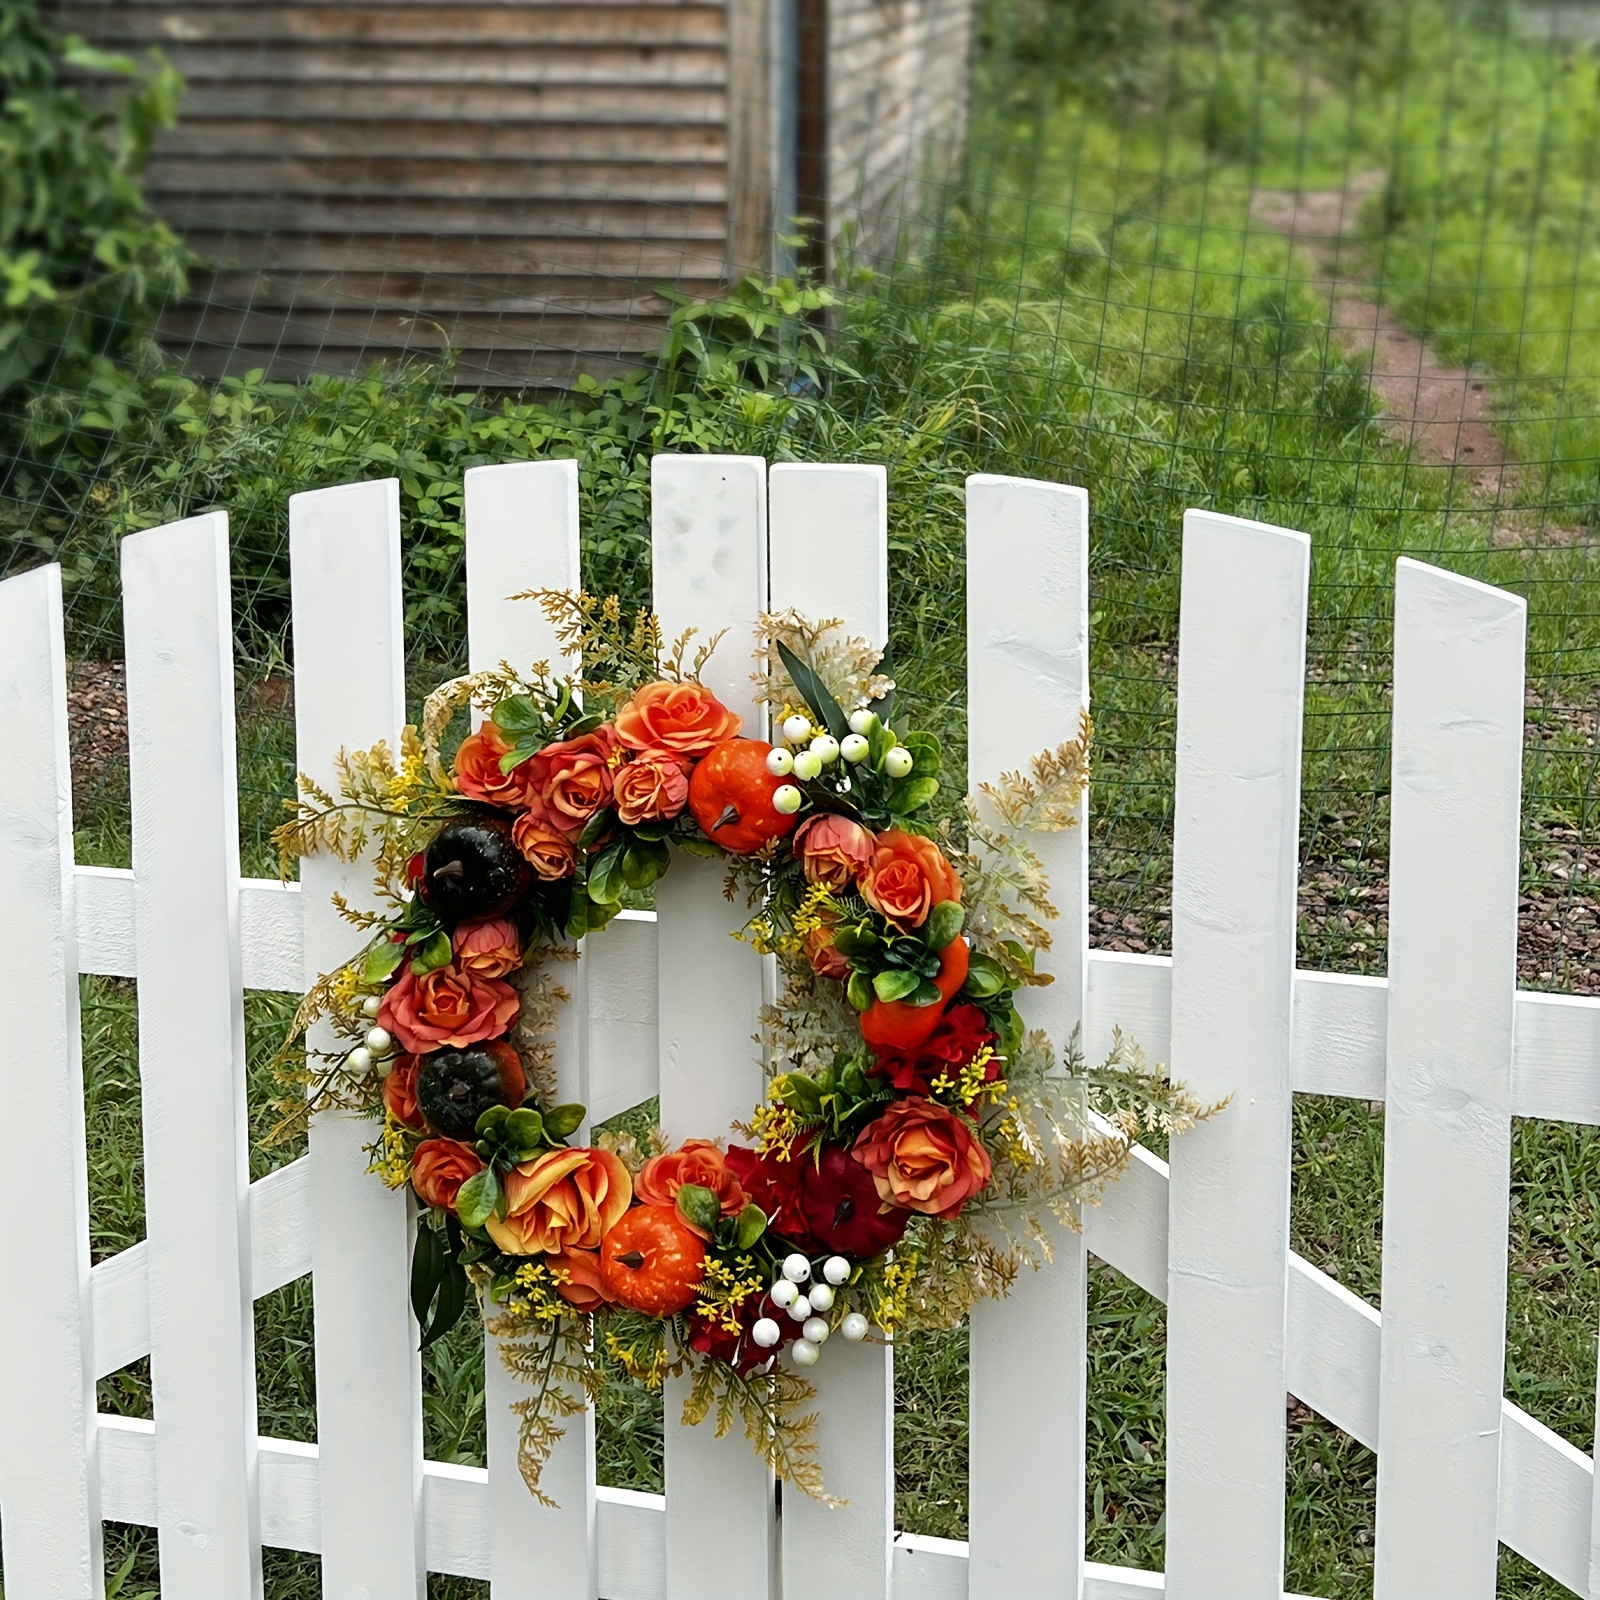 40cm Flower Wreaths for Front Door for Summer Spring All Seasons, Indoor  Outdoor Year Round Wreath Farmhouse Front Porch Outside Decorations